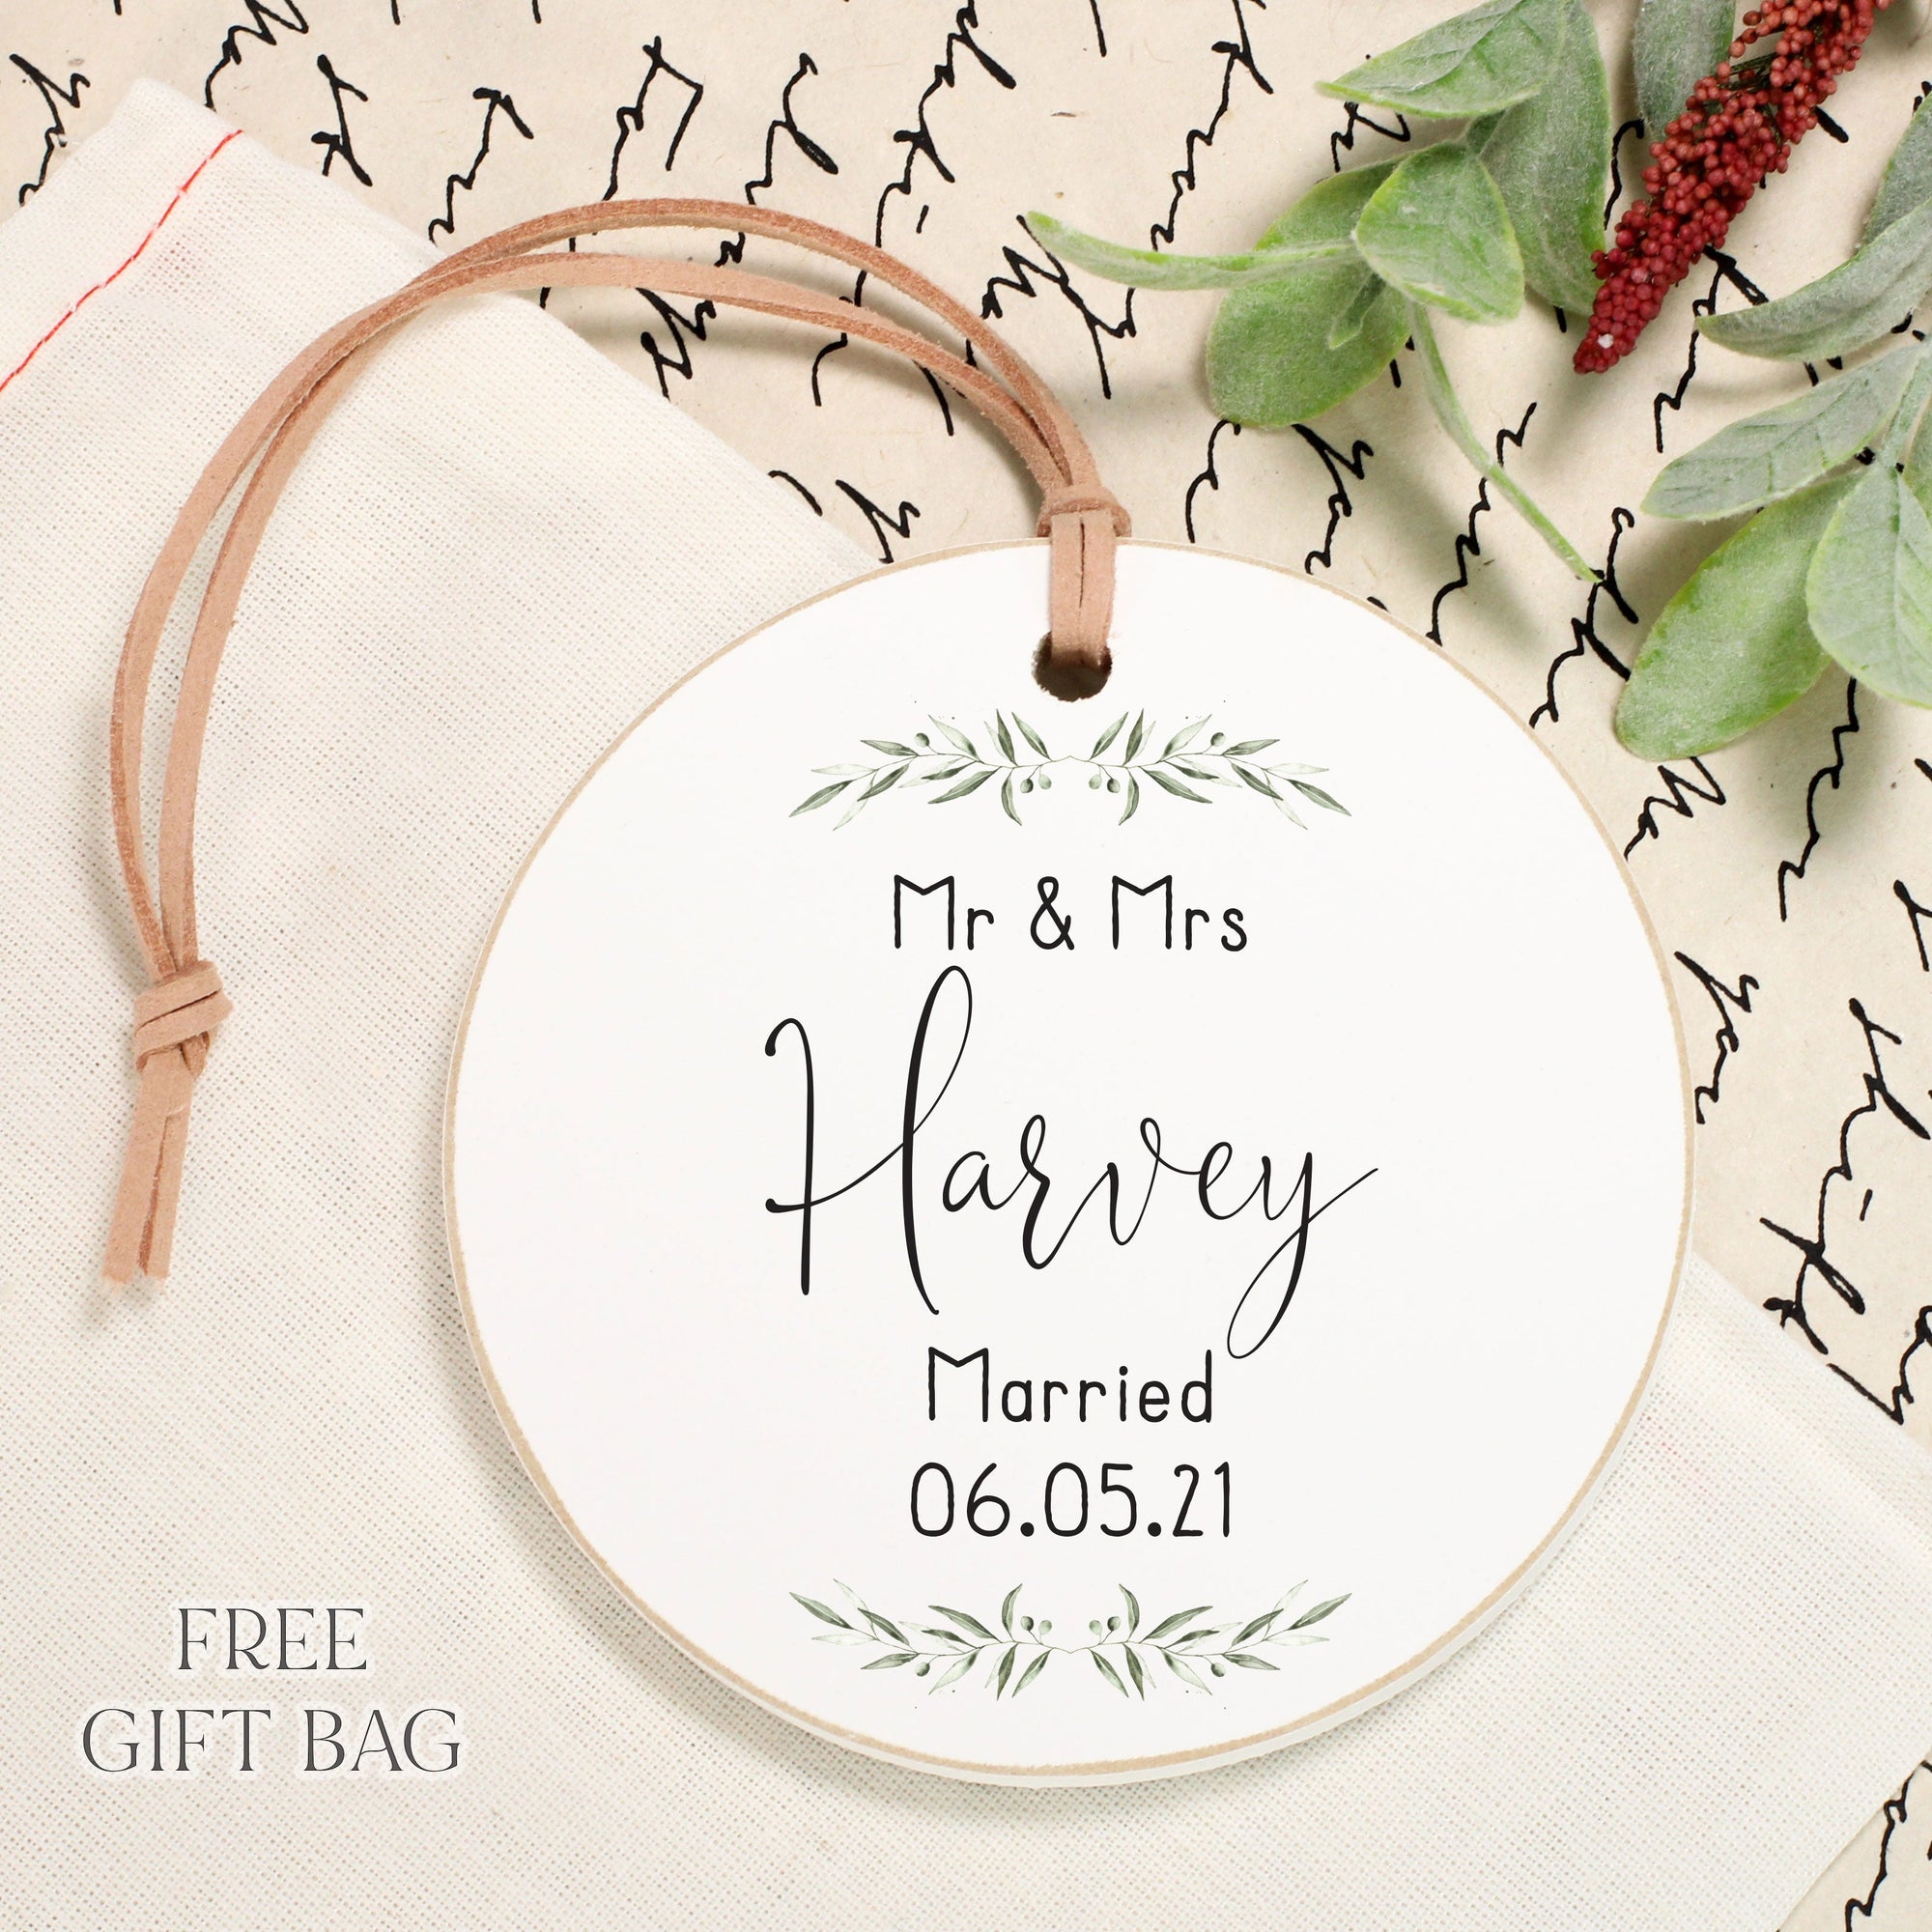 Customizable Ornament | Mr and Mrs Wedding Date Holiday Ornaments The WAREHOUSE Studio 